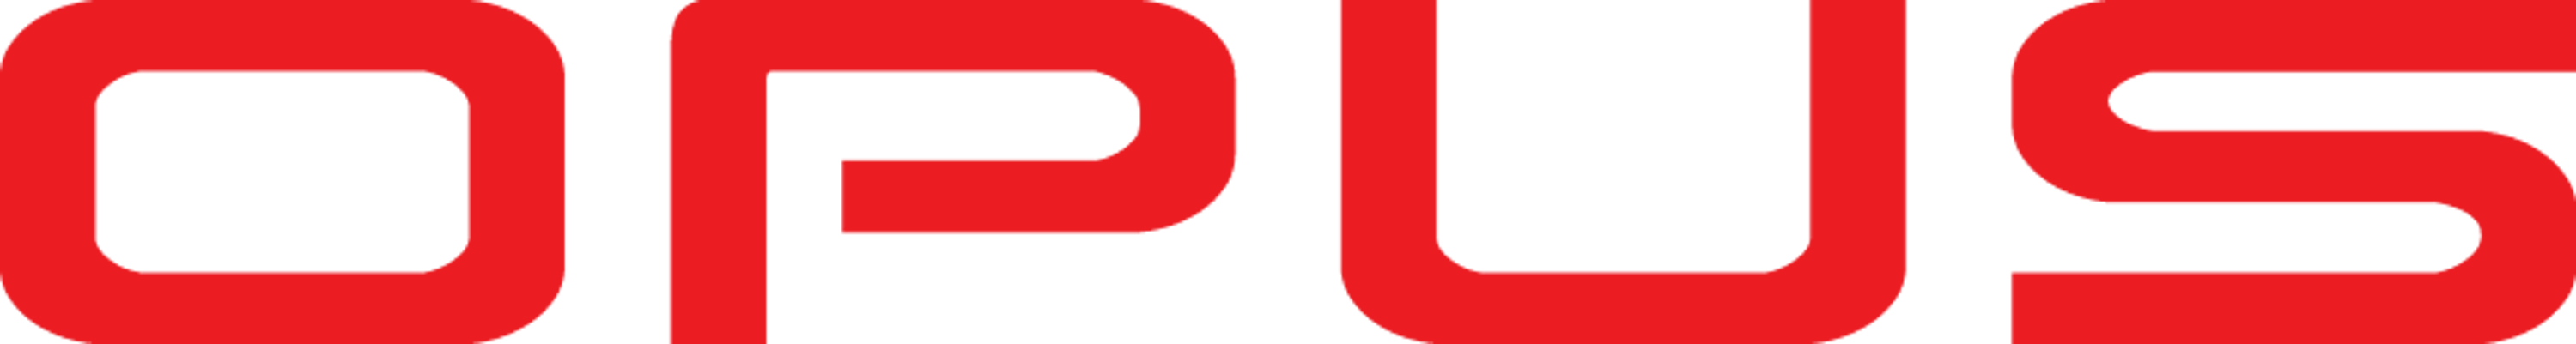 opus-red-logo-final.png